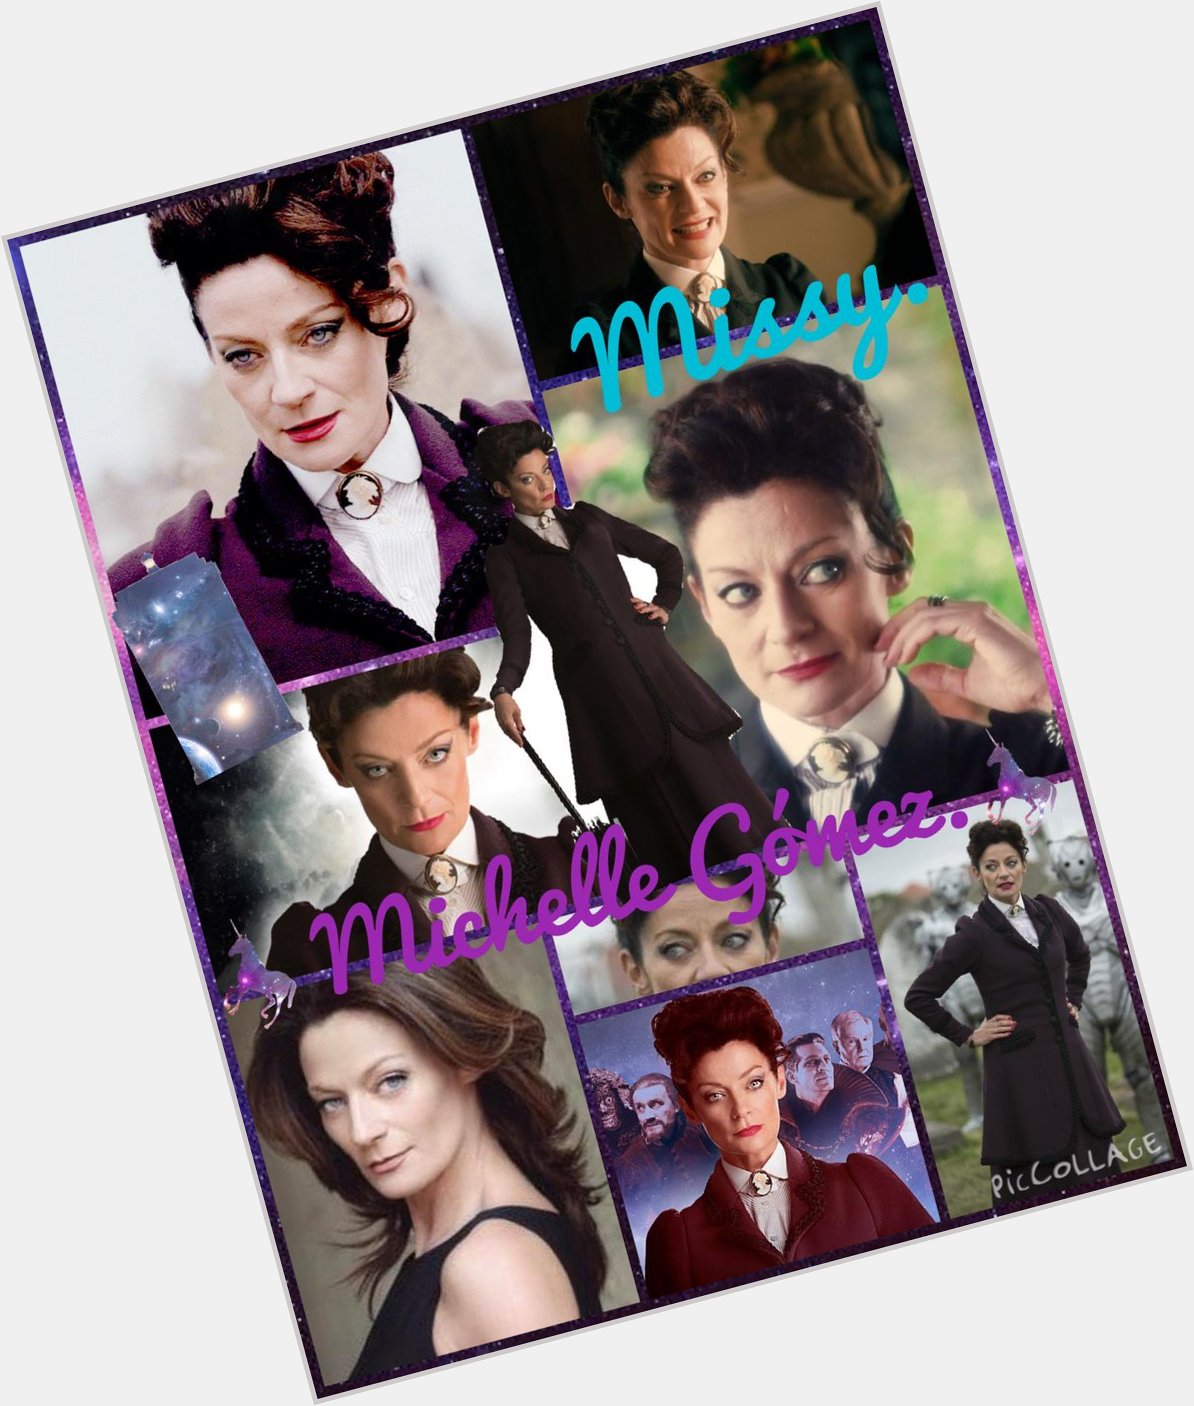   Happy late birthday to Michelle Gomez,who plays Missy on Doctor Who.  